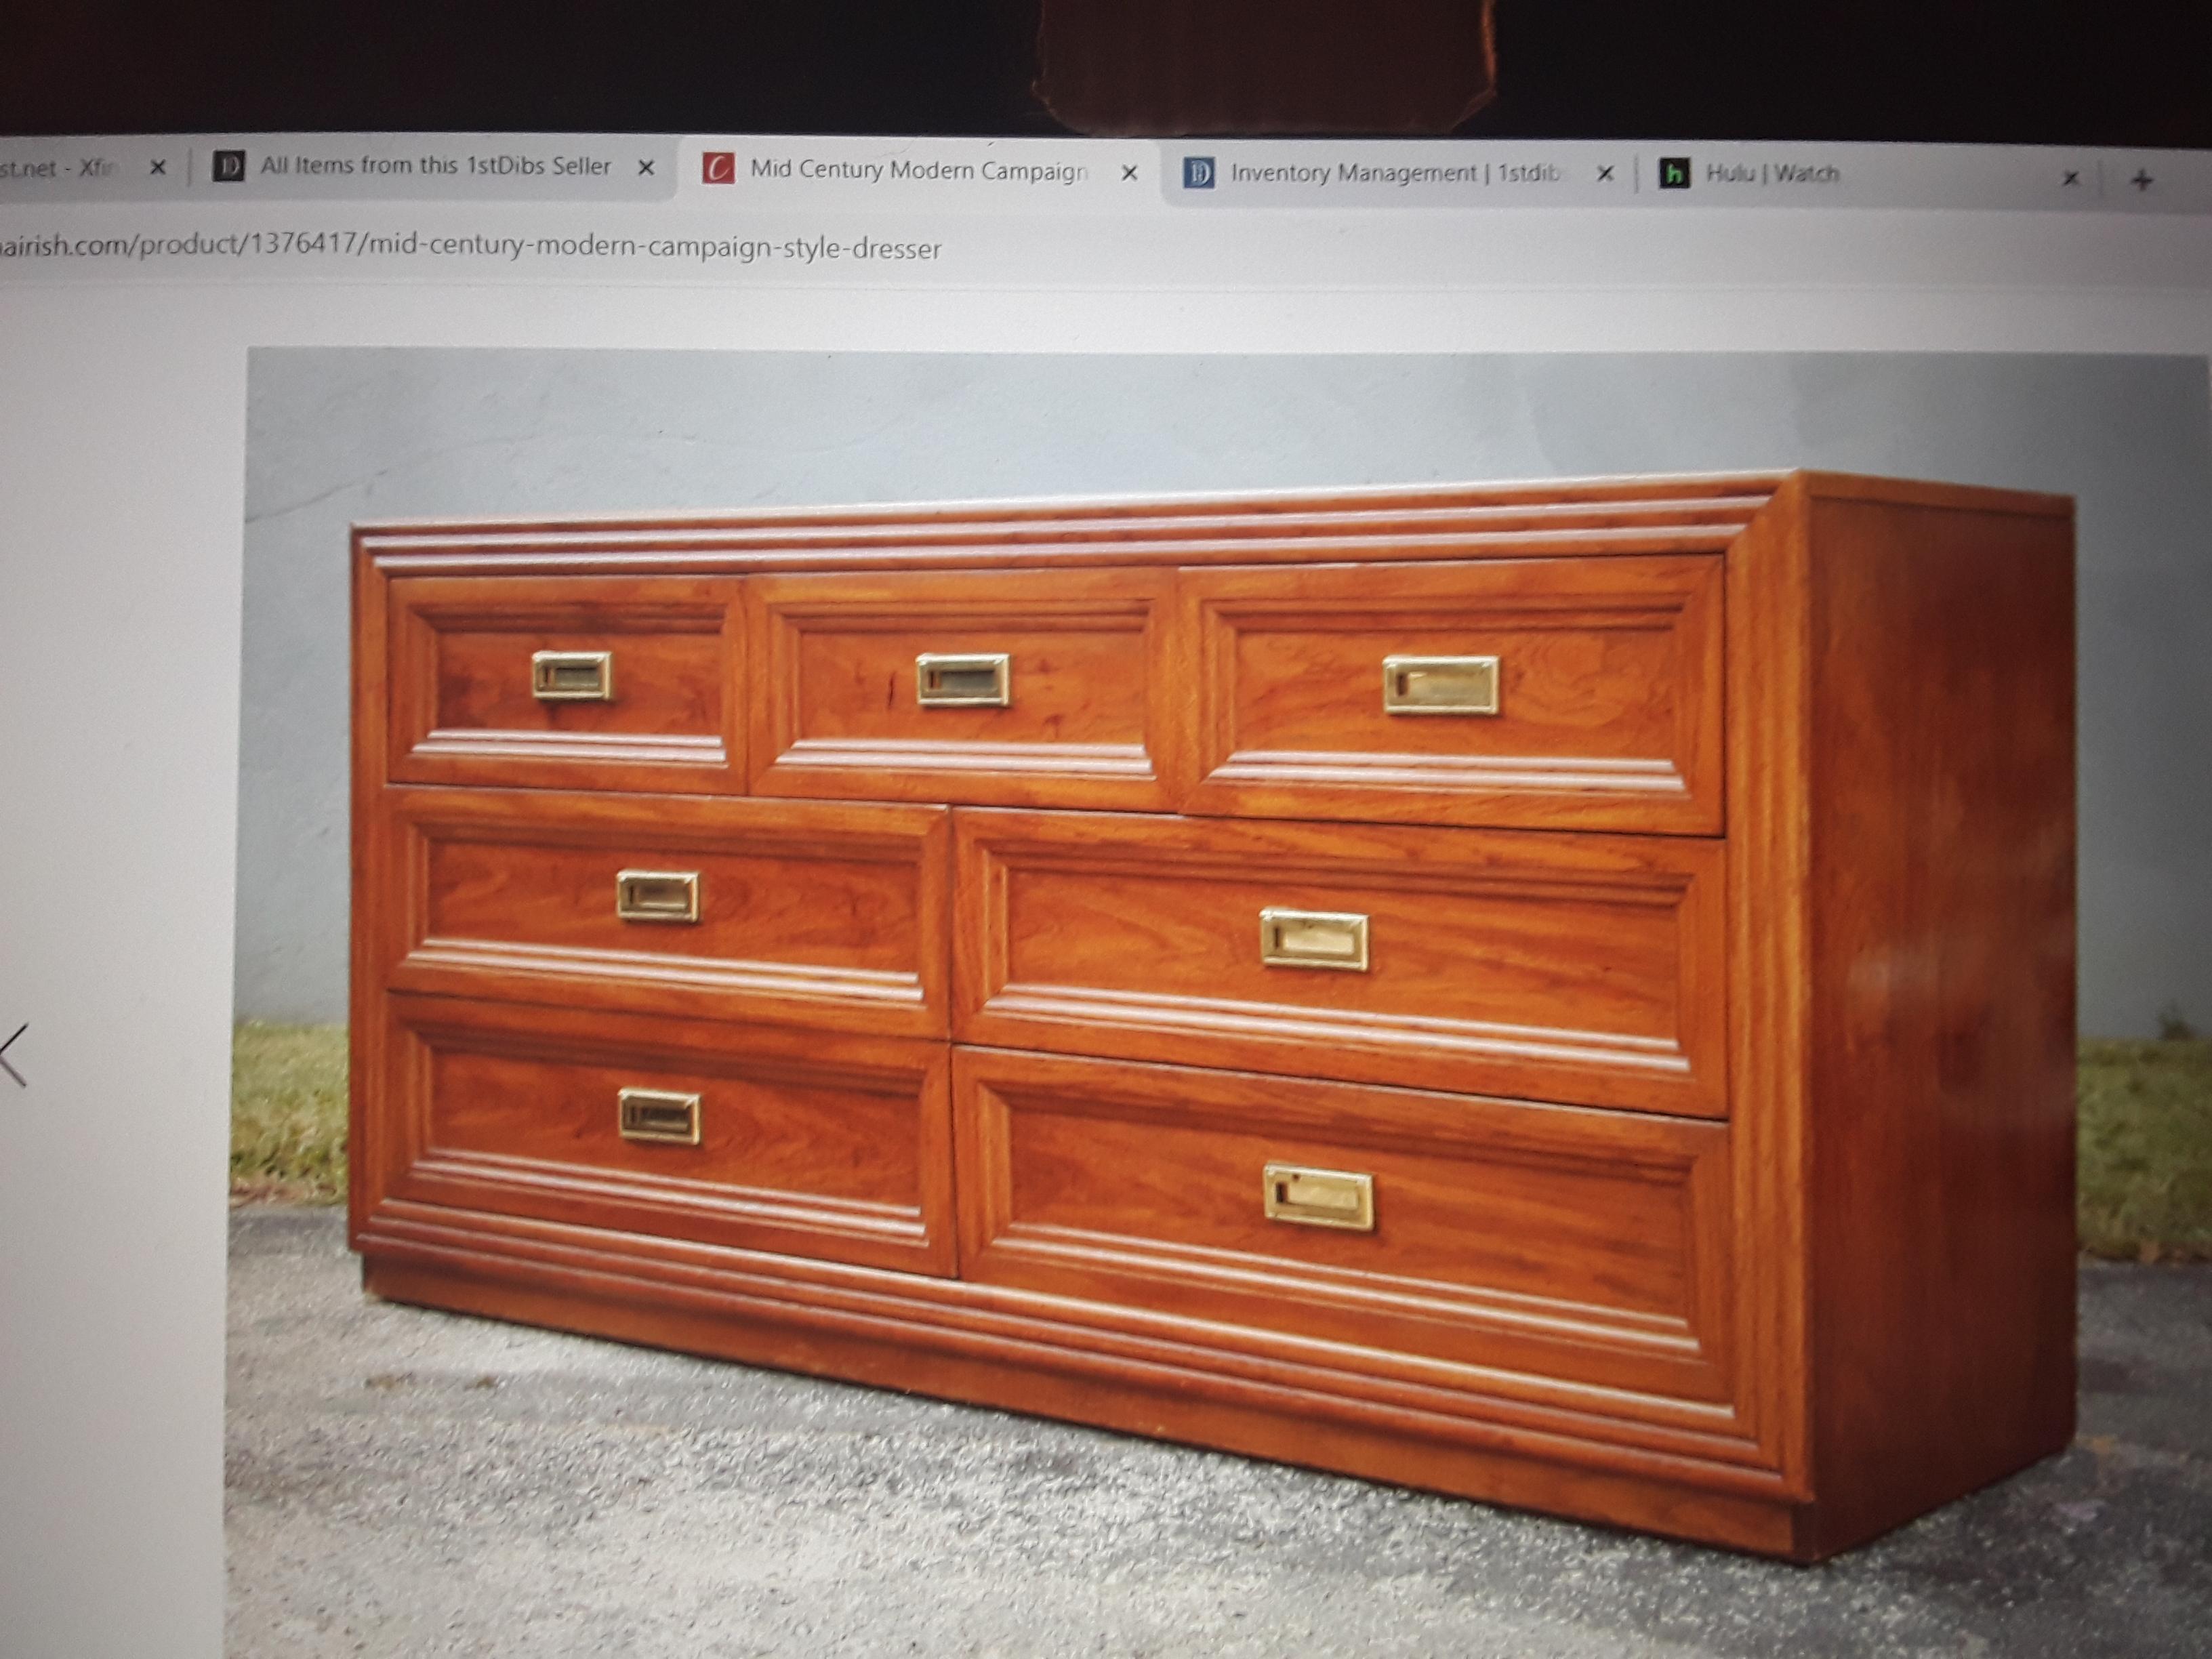 American 1970's Mid Century Modern Campaign style Dresser by Thomasville For Sale